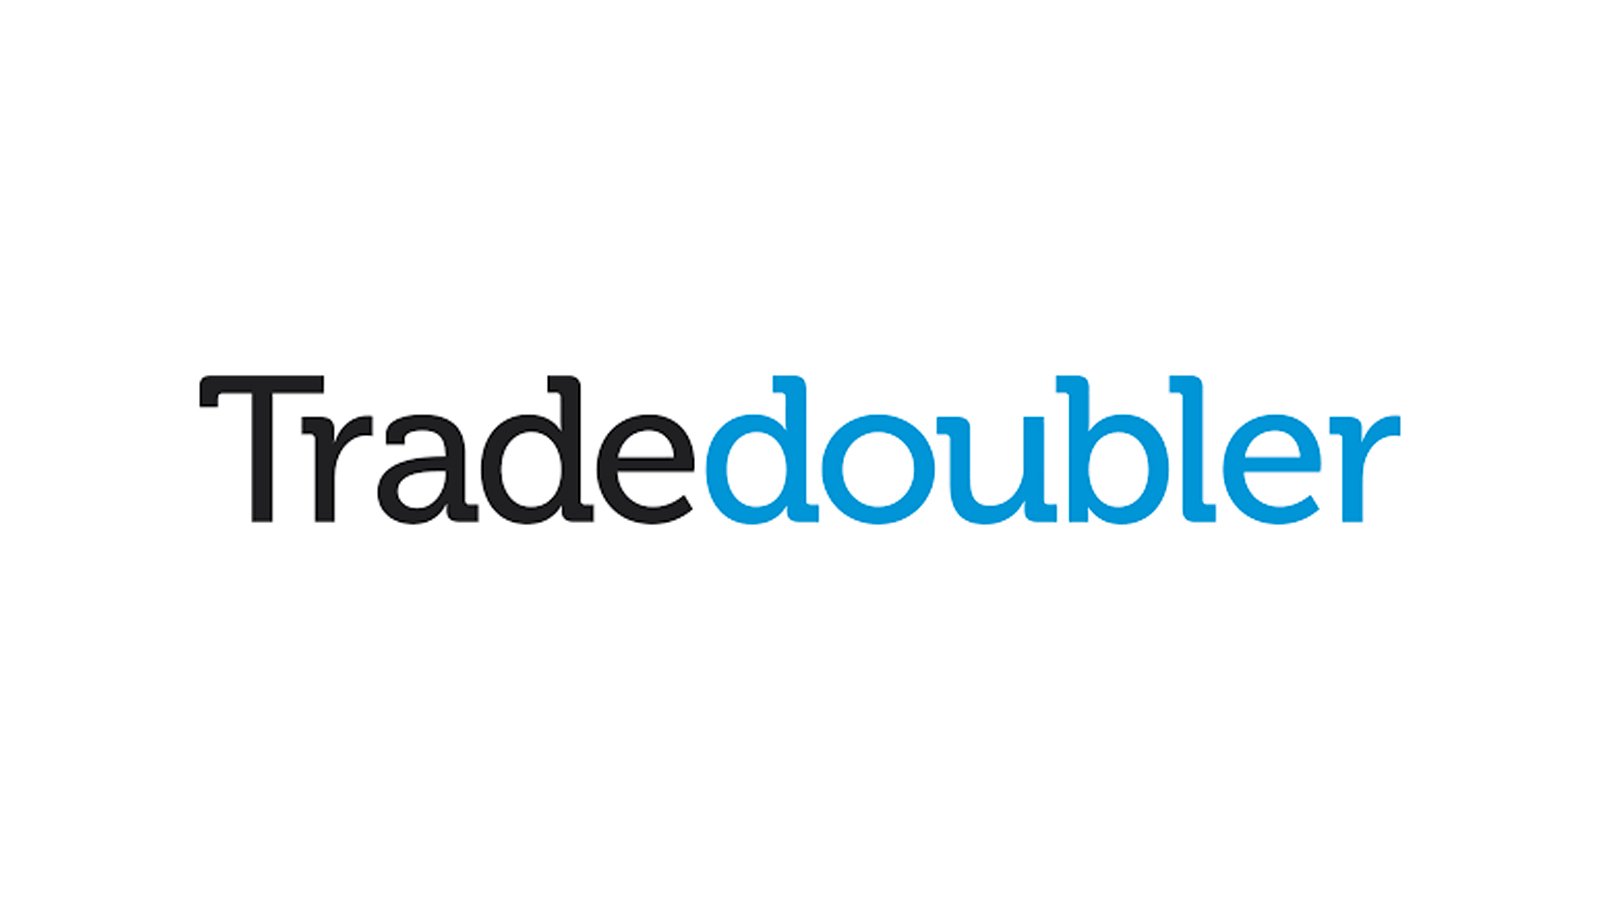 Eagle Eye and Tradedoubler partner to extend affiliate networking benefits to the High Street